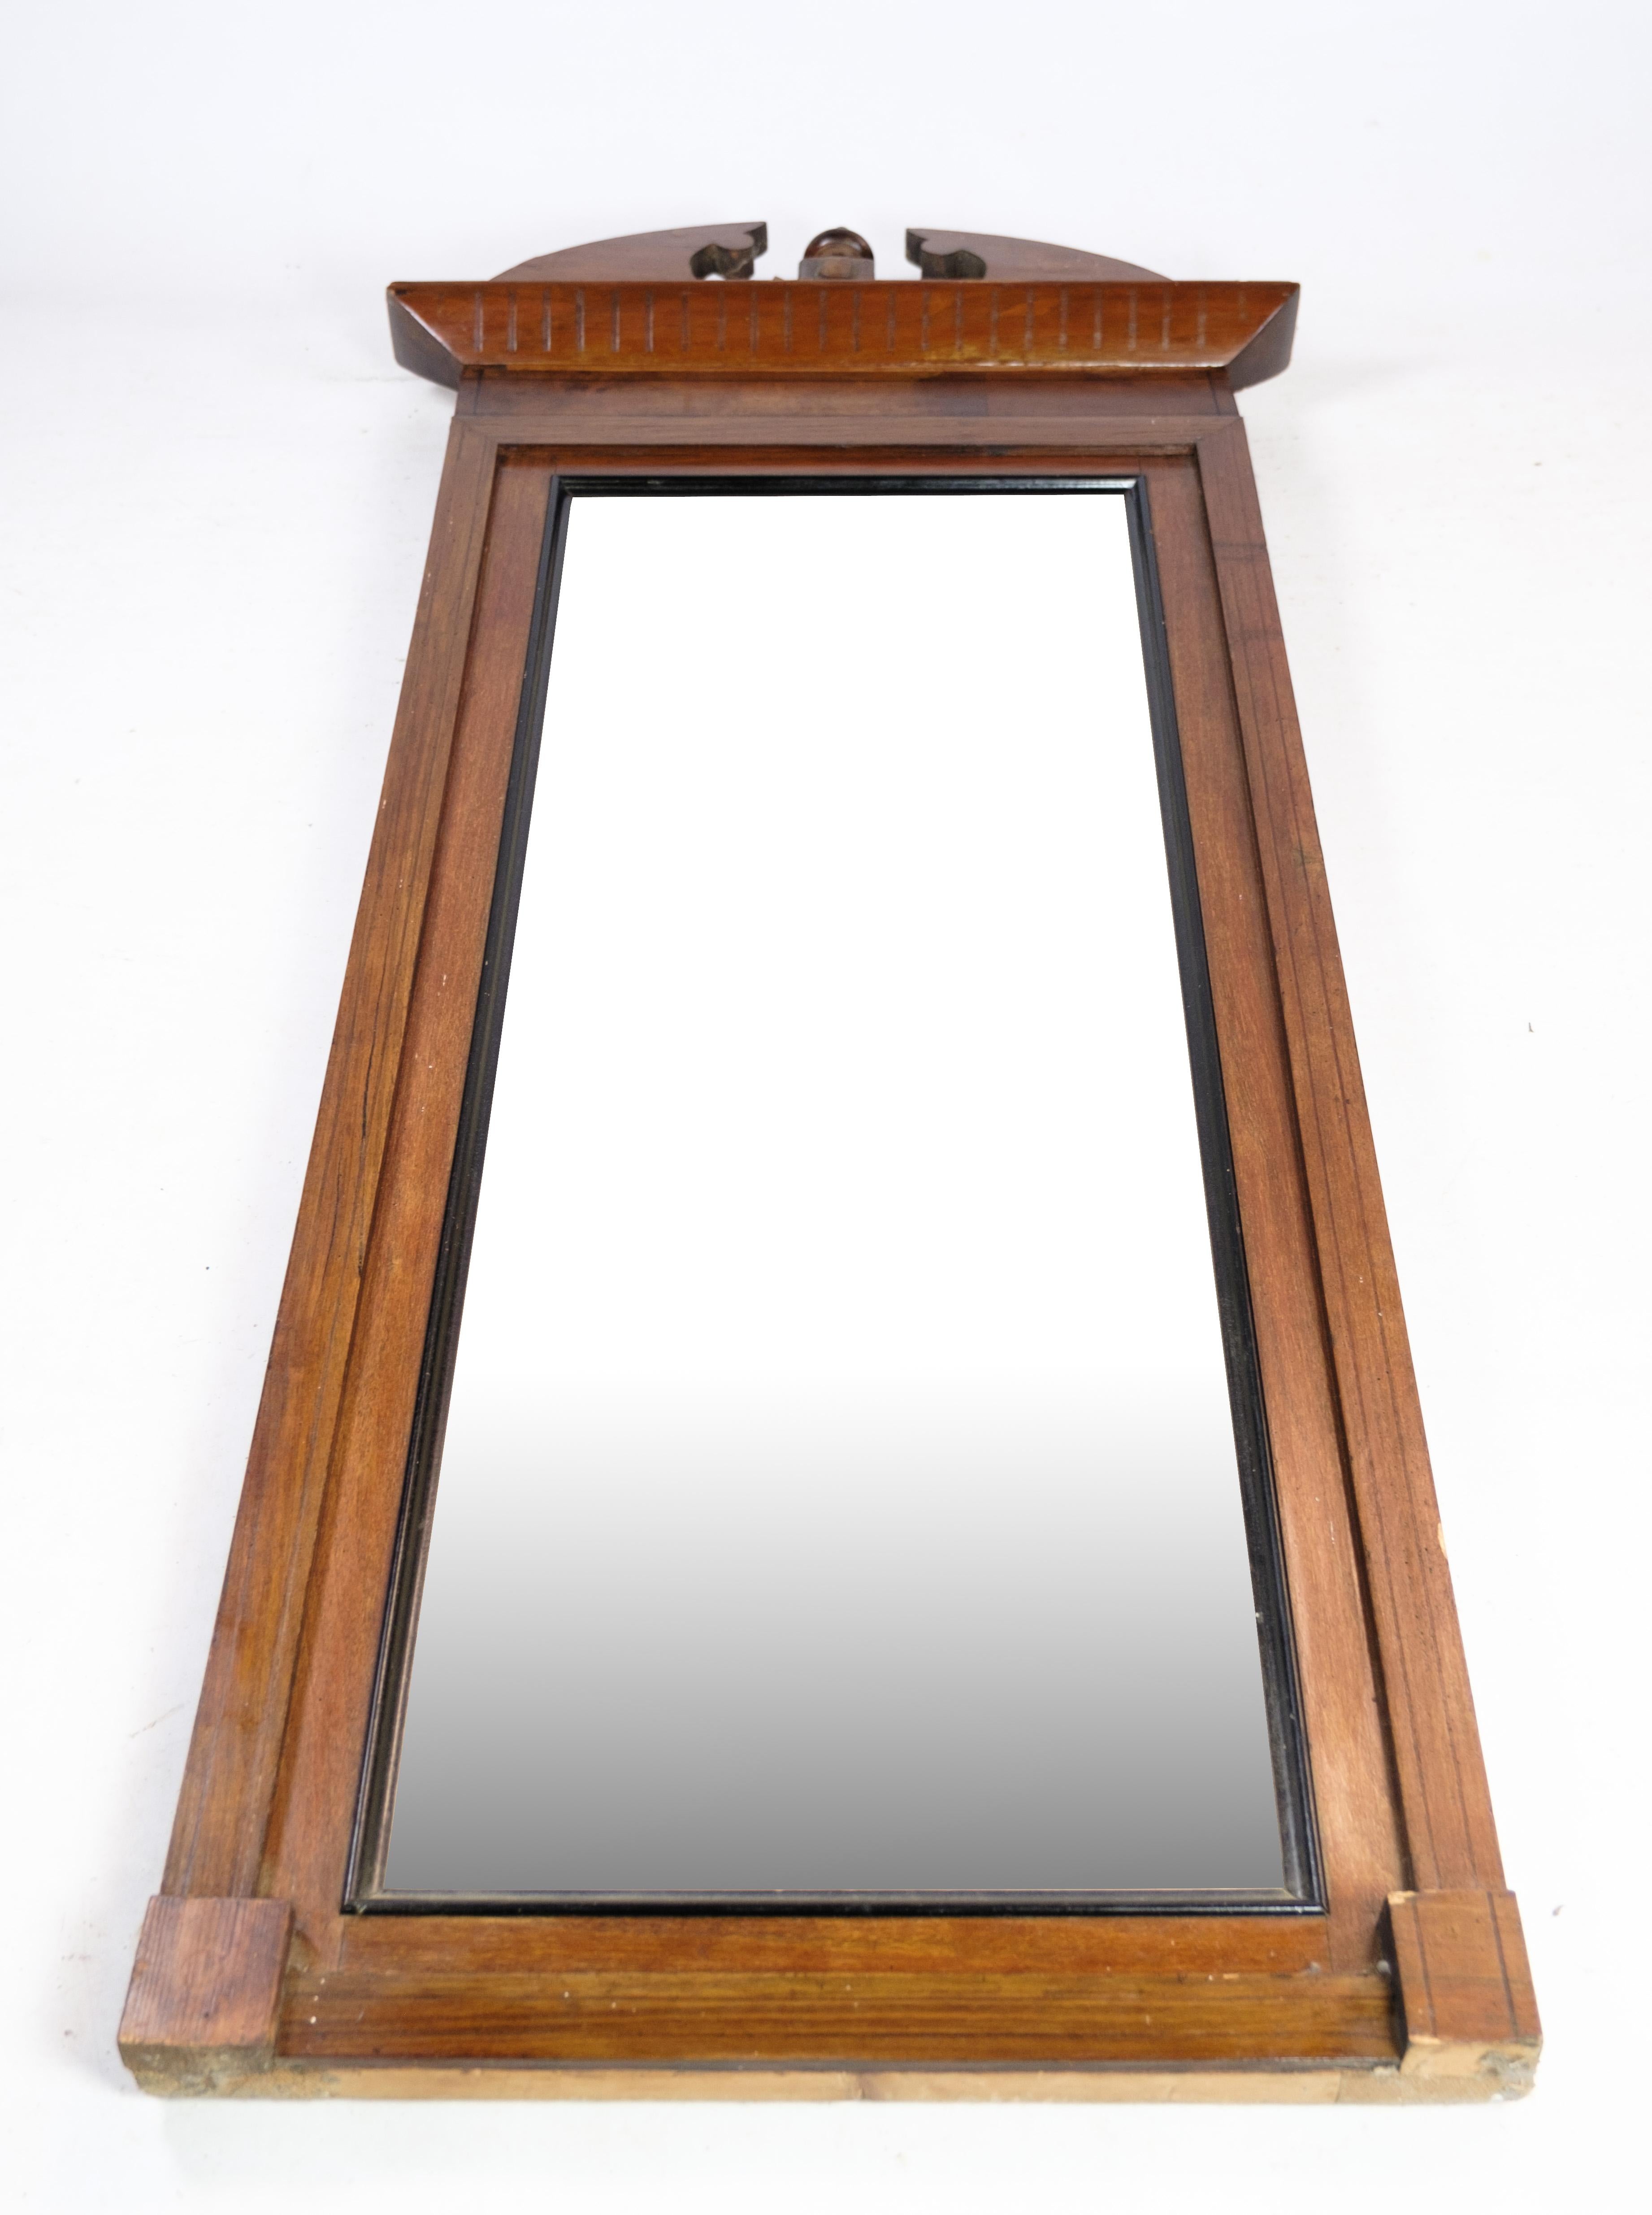 The Mirror of hand-polished mahogany is a beautiful and unique piece of furniture from the late Empire period. This mirror was crafted in Denmark around the 1840s and features intricate carvings that add to its elegance and charm. The mahogany wood